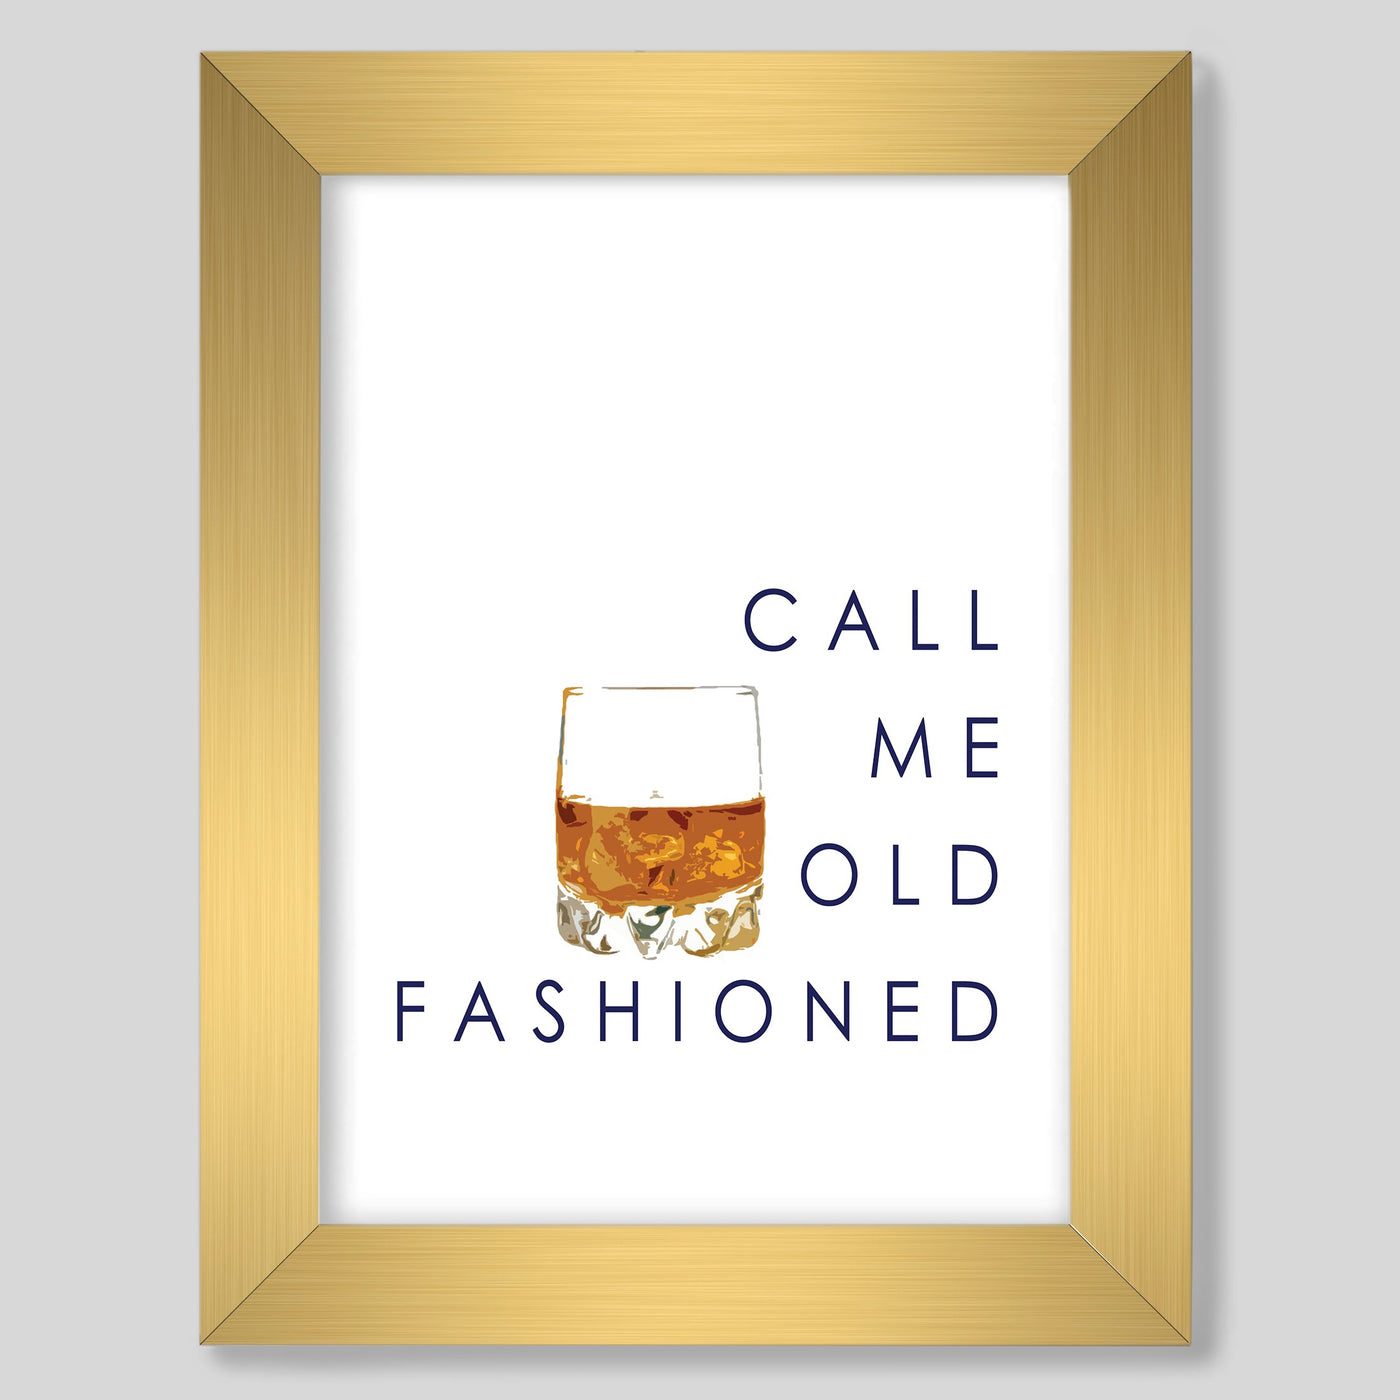 Gallery Prints 8x10 / gold frame Call Me Old Fashioned Print Katie Kime